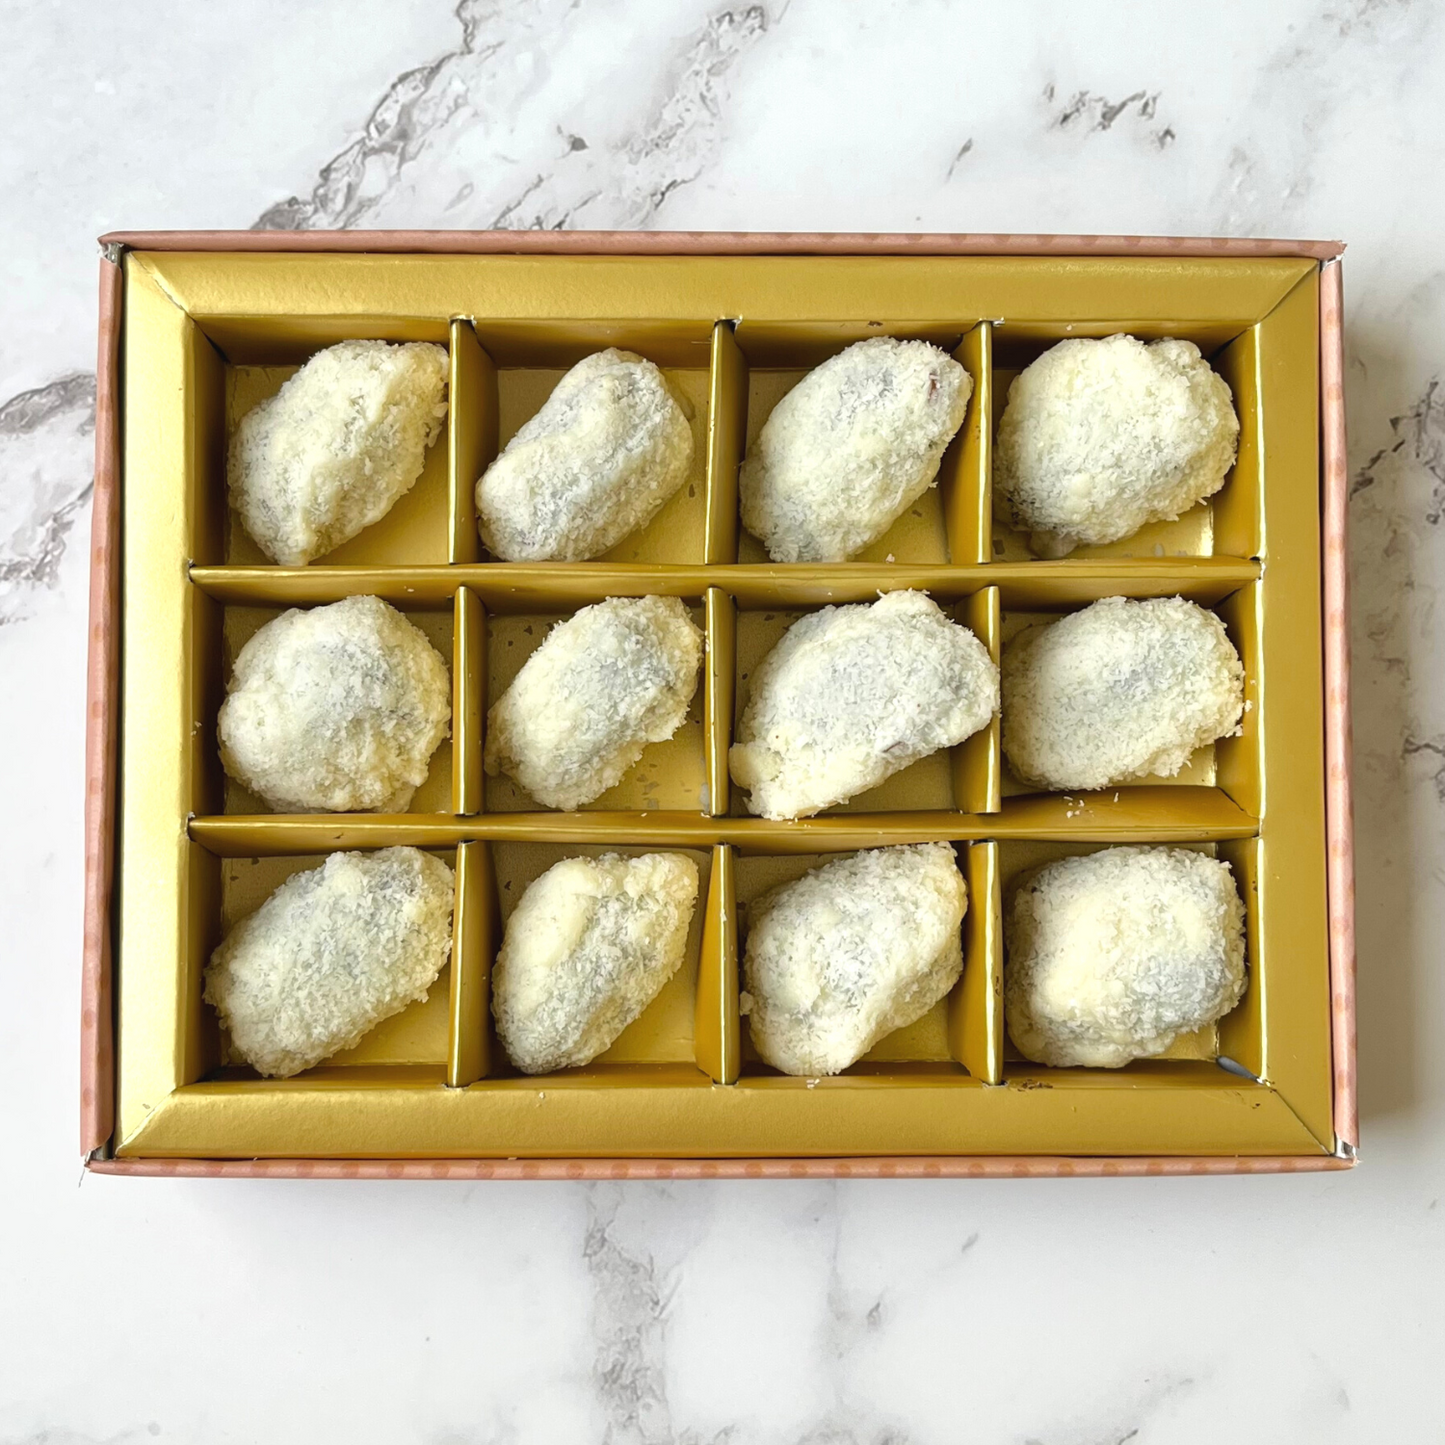 White Chocolate Dates with Almonds & Coconut Shreds - 12 Pieces